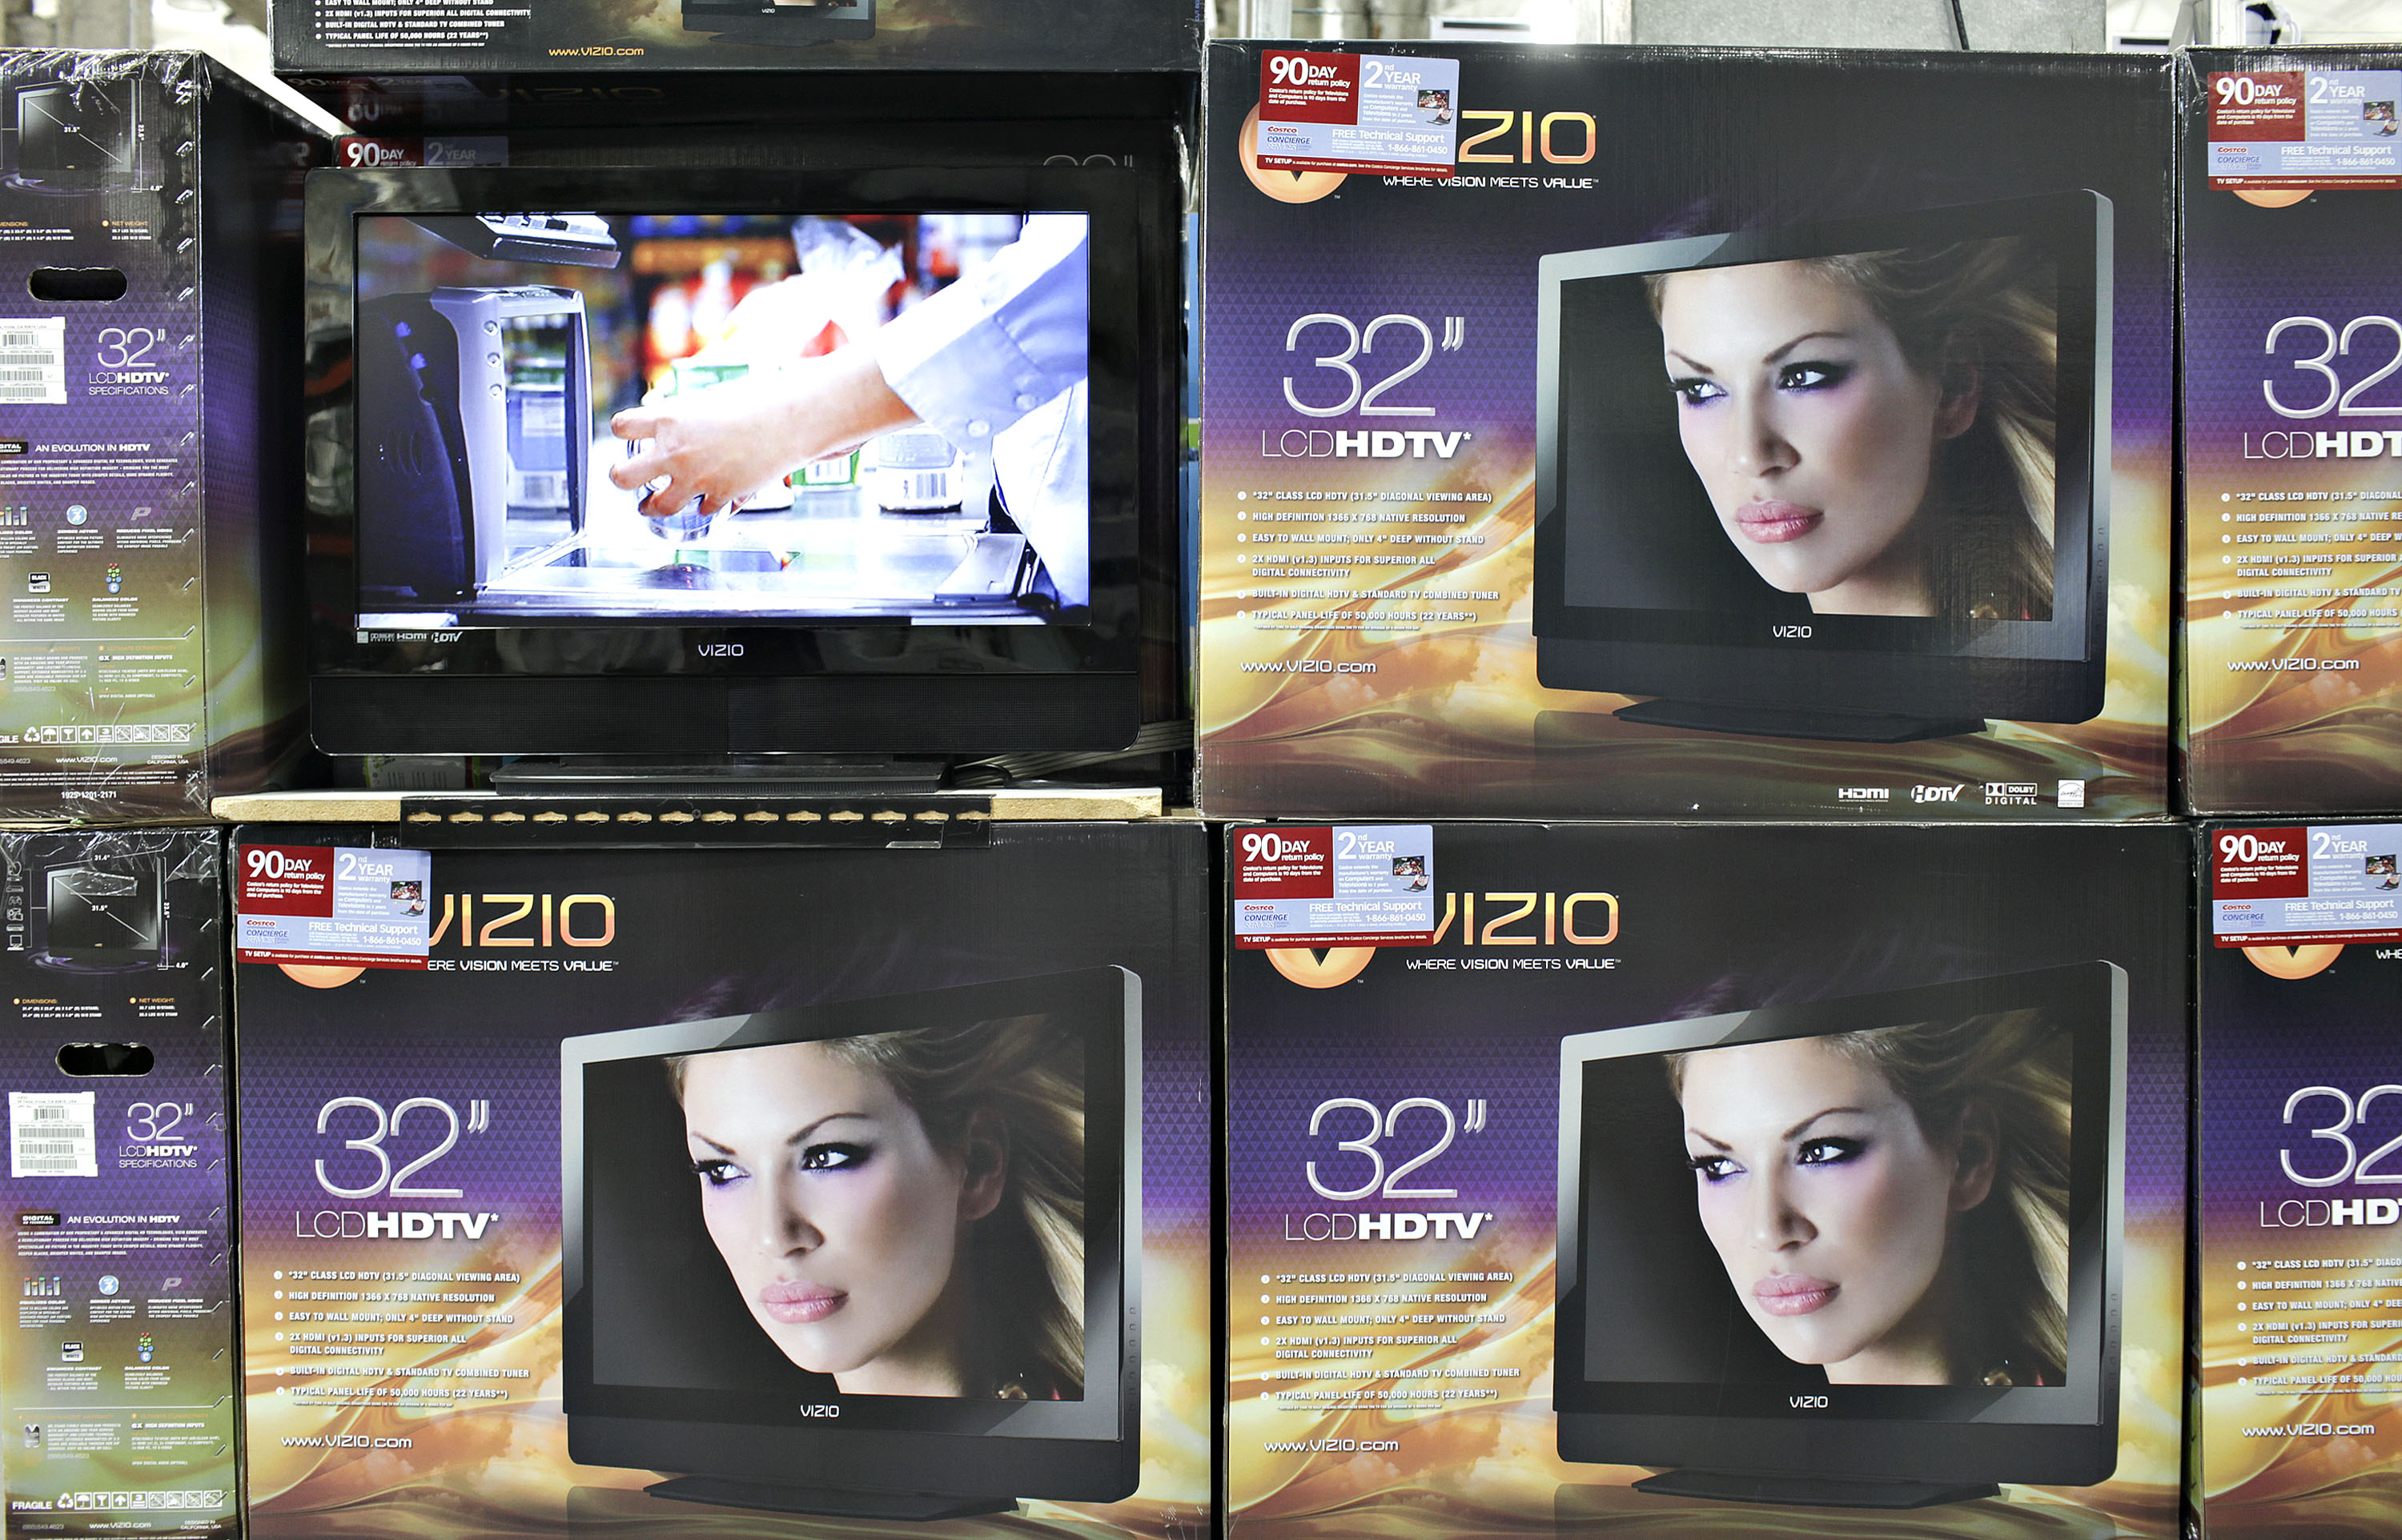 ViZio flat screen televisions sit on display inside a Costco store in Queens, New York, U.S., on Thursday, May 28, 2009. (Bloomberg&mdash;Bloomberg via Getty Images)